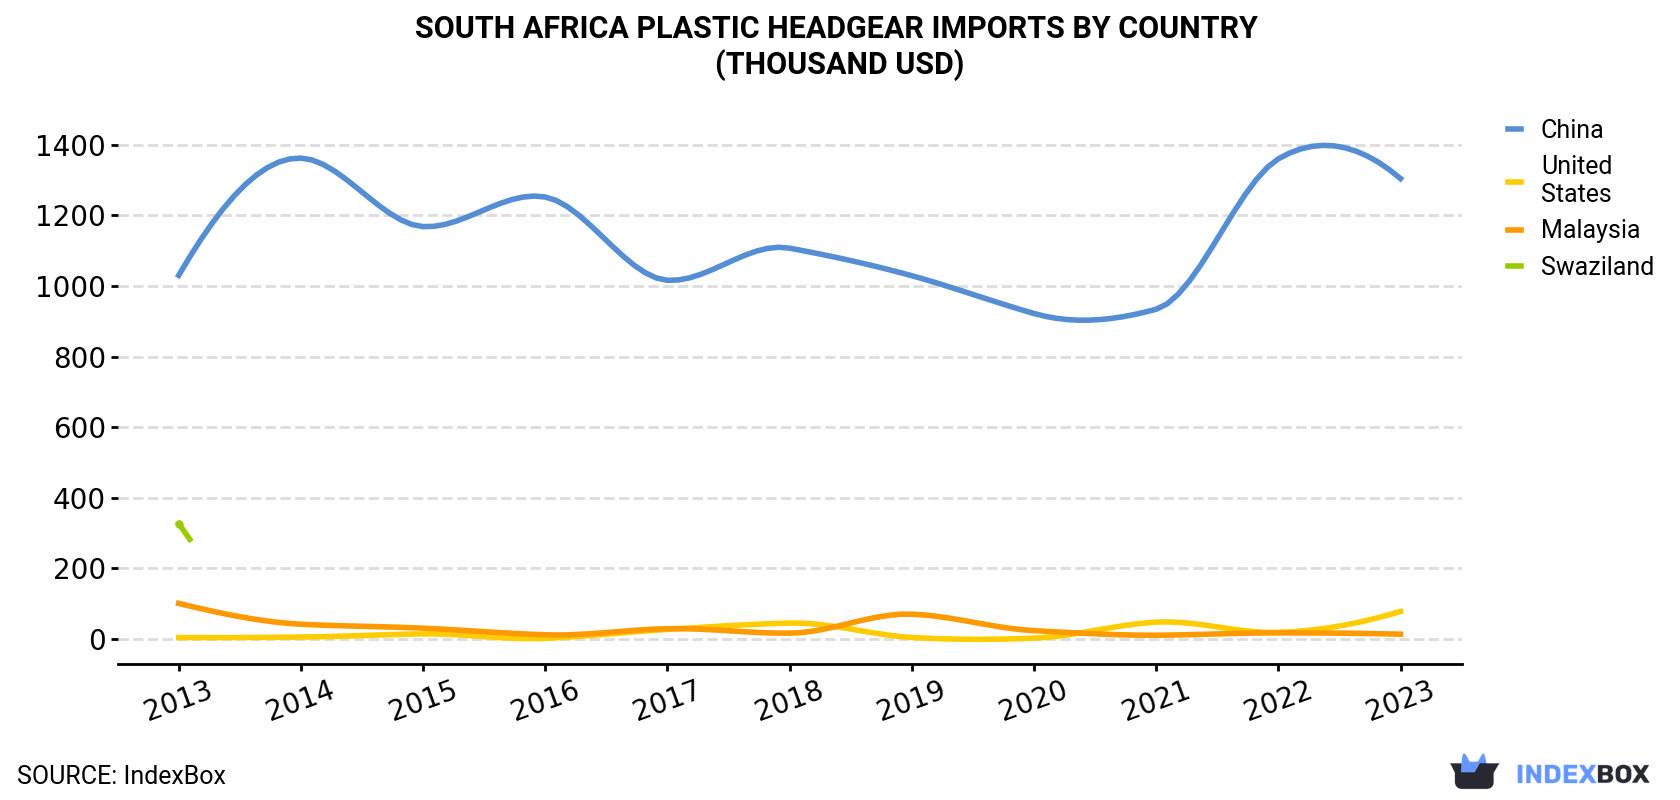 South Africa Plastic Headgear Imports By Country (Thousand USD)